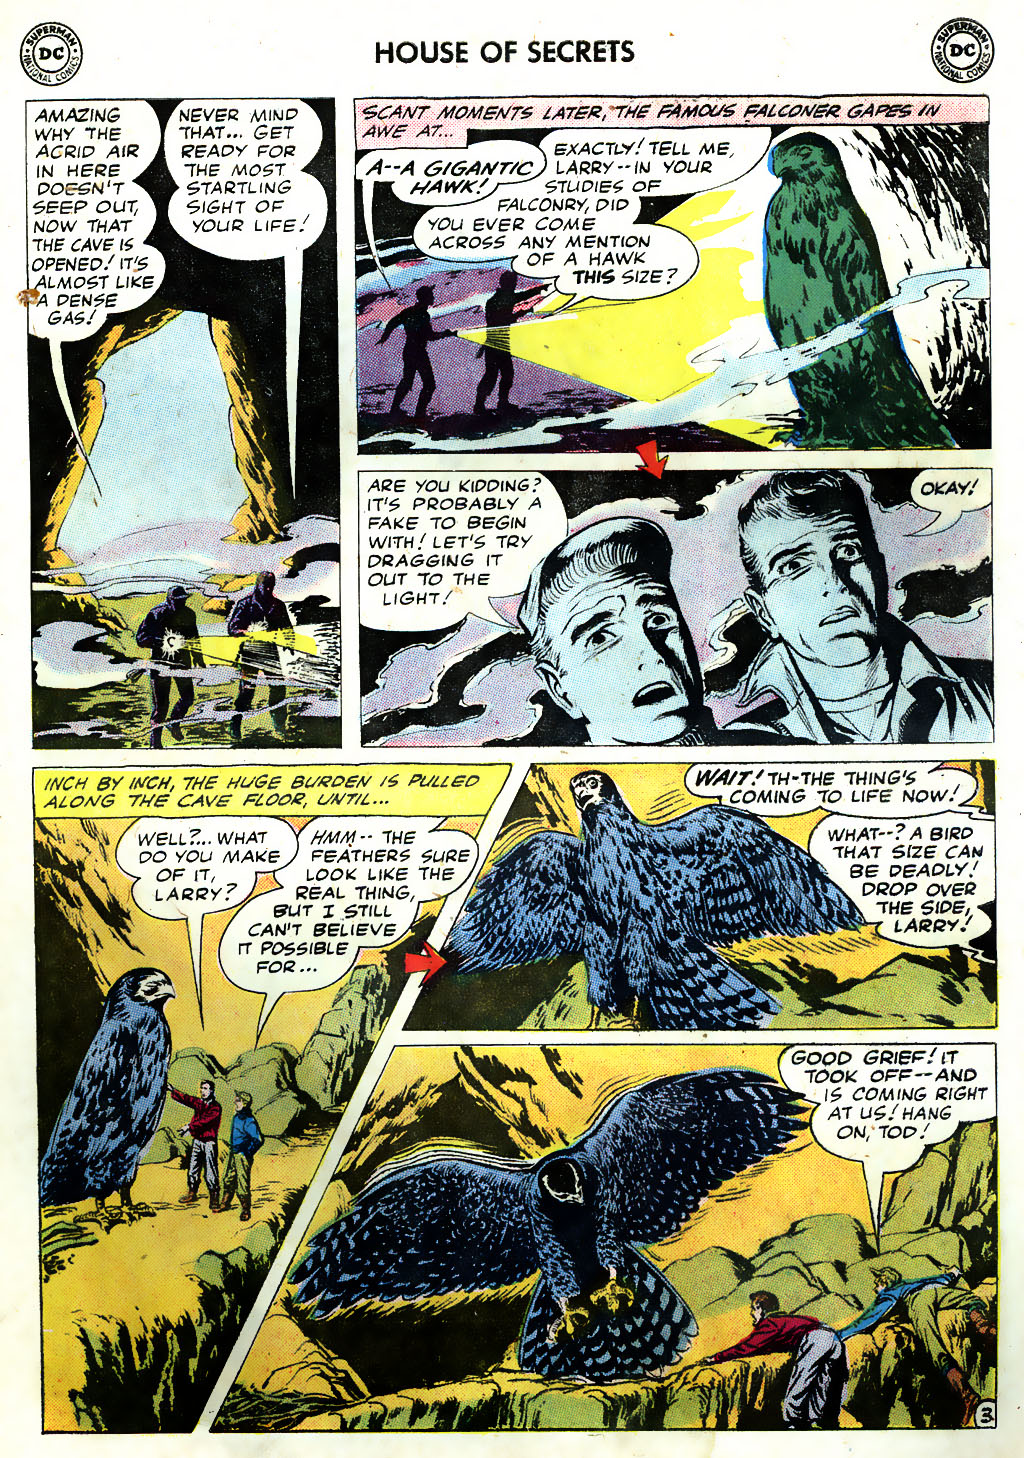 House of Secrets (1956) Issue #33 #33 - English 5